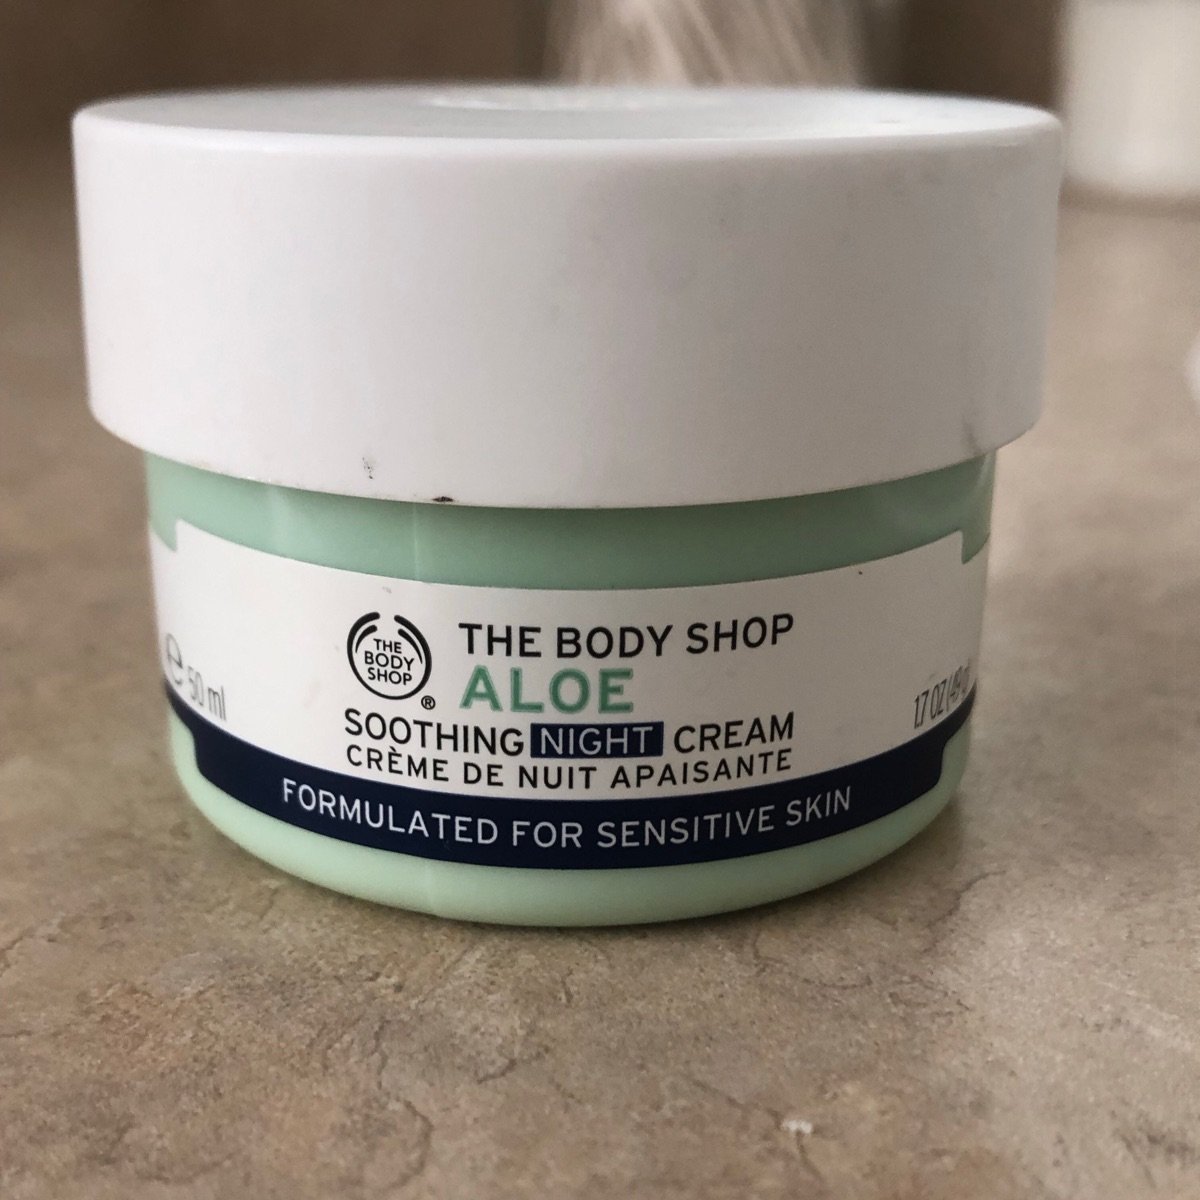 The Body Shop Aloe soothing Night Cream Reviews | abillion